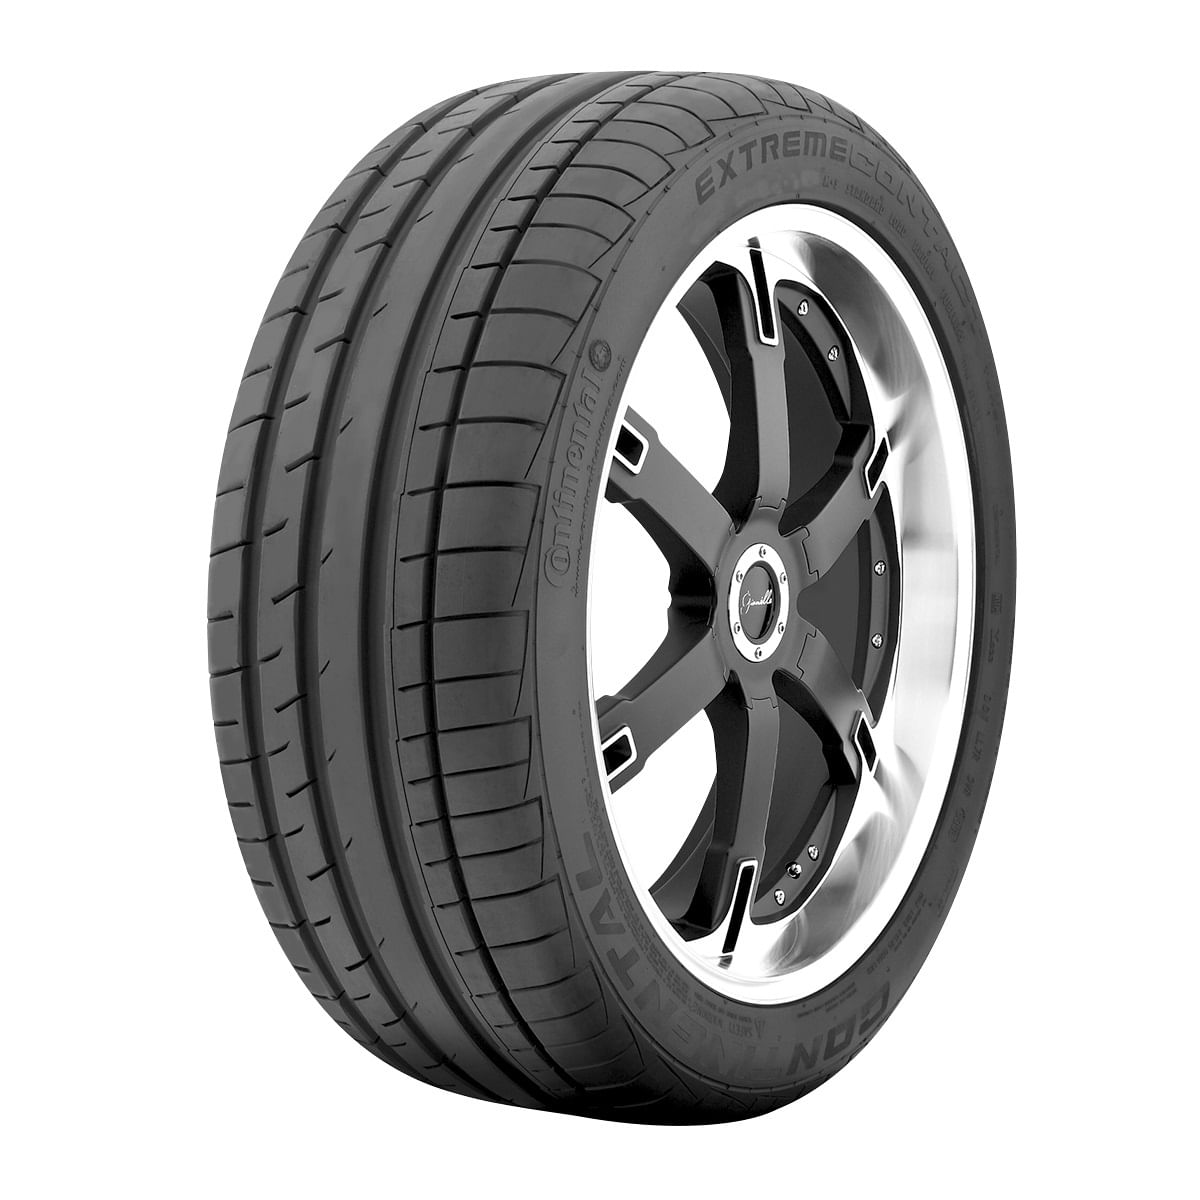 5109507_Pneu Continental Aro 17 235/45R17 Extreme Contact DW_1_Zoom